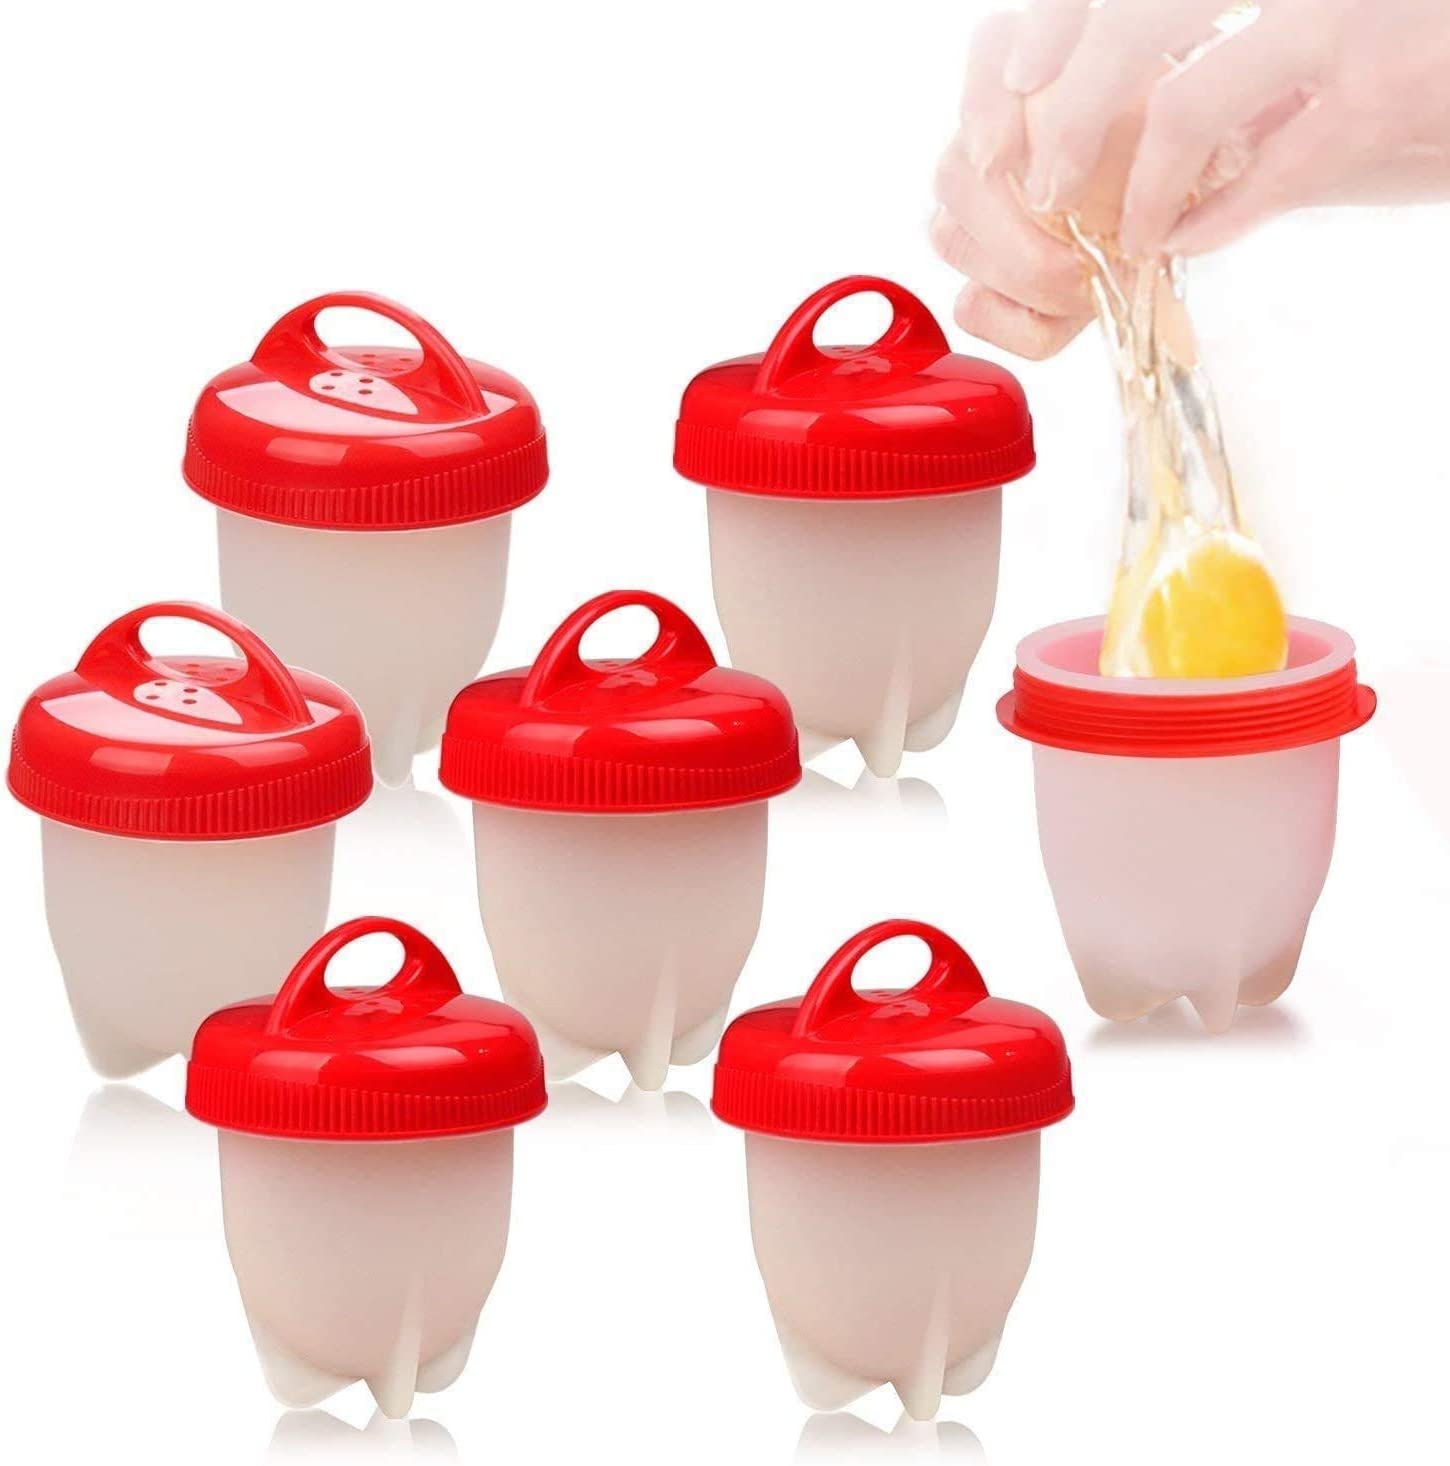 YUESEN Egg Cooker Silicone, Egg Cooker without Bowl Easy Eggs, Non-Stick Silicone Boiled Steamer Eggies, Maker Egg Cooker BPA Free Non-Stick Egg Poacher, Quick for Kitchen Gadgets Accessories, 6 Pieces